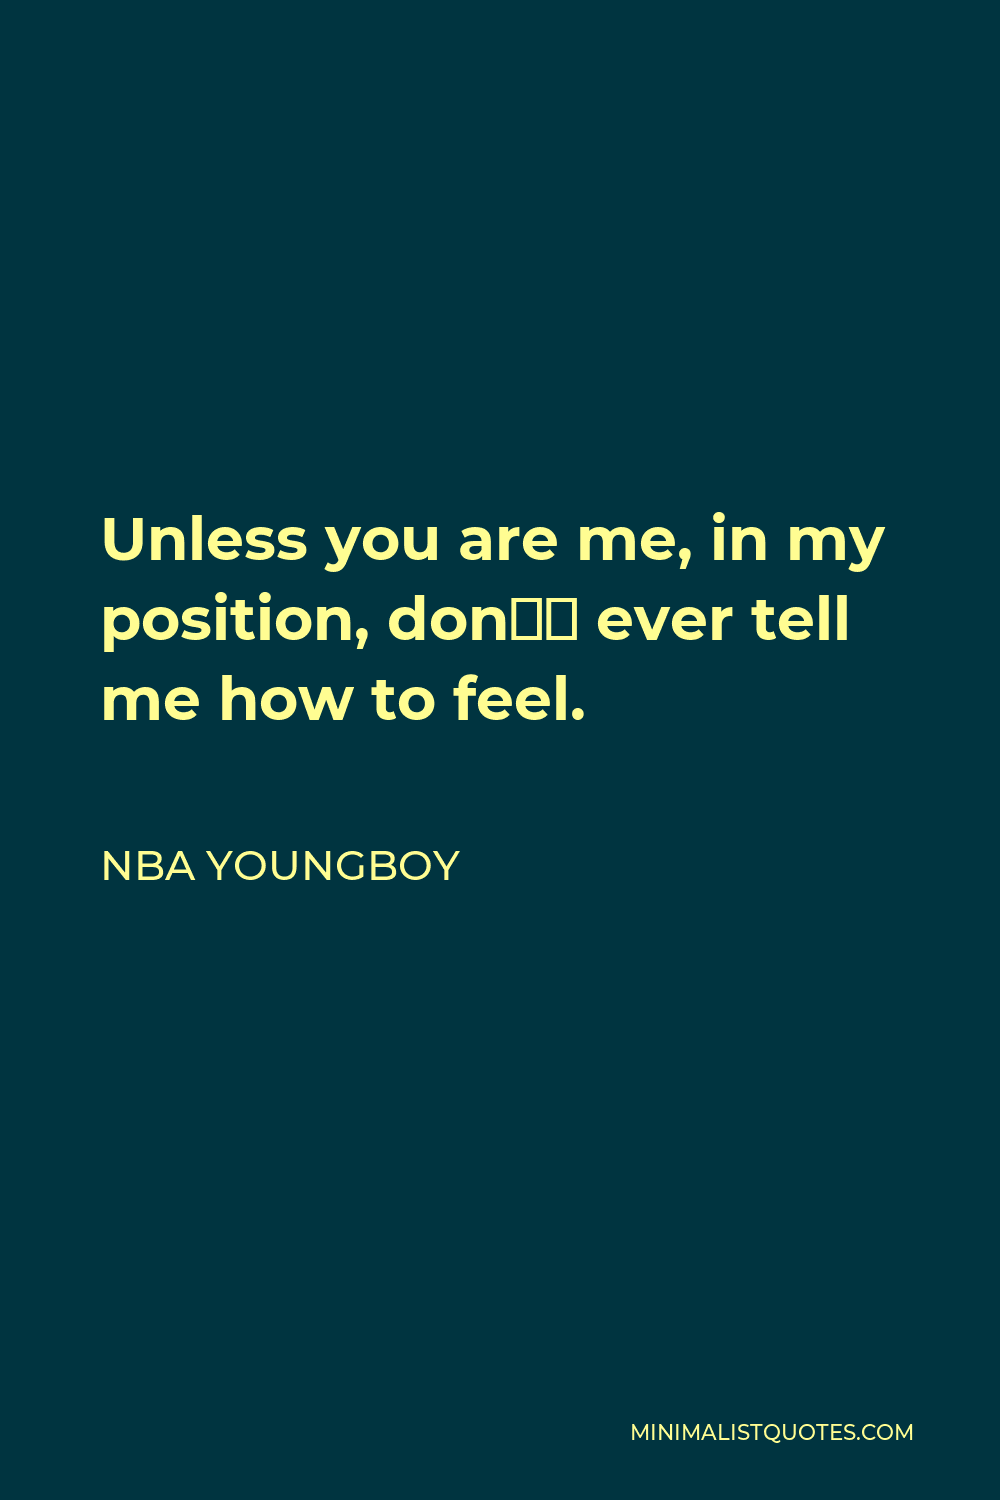 NBA Youngboy Quote - Unless you are me, in my position, don’t ever tell me how to feel.